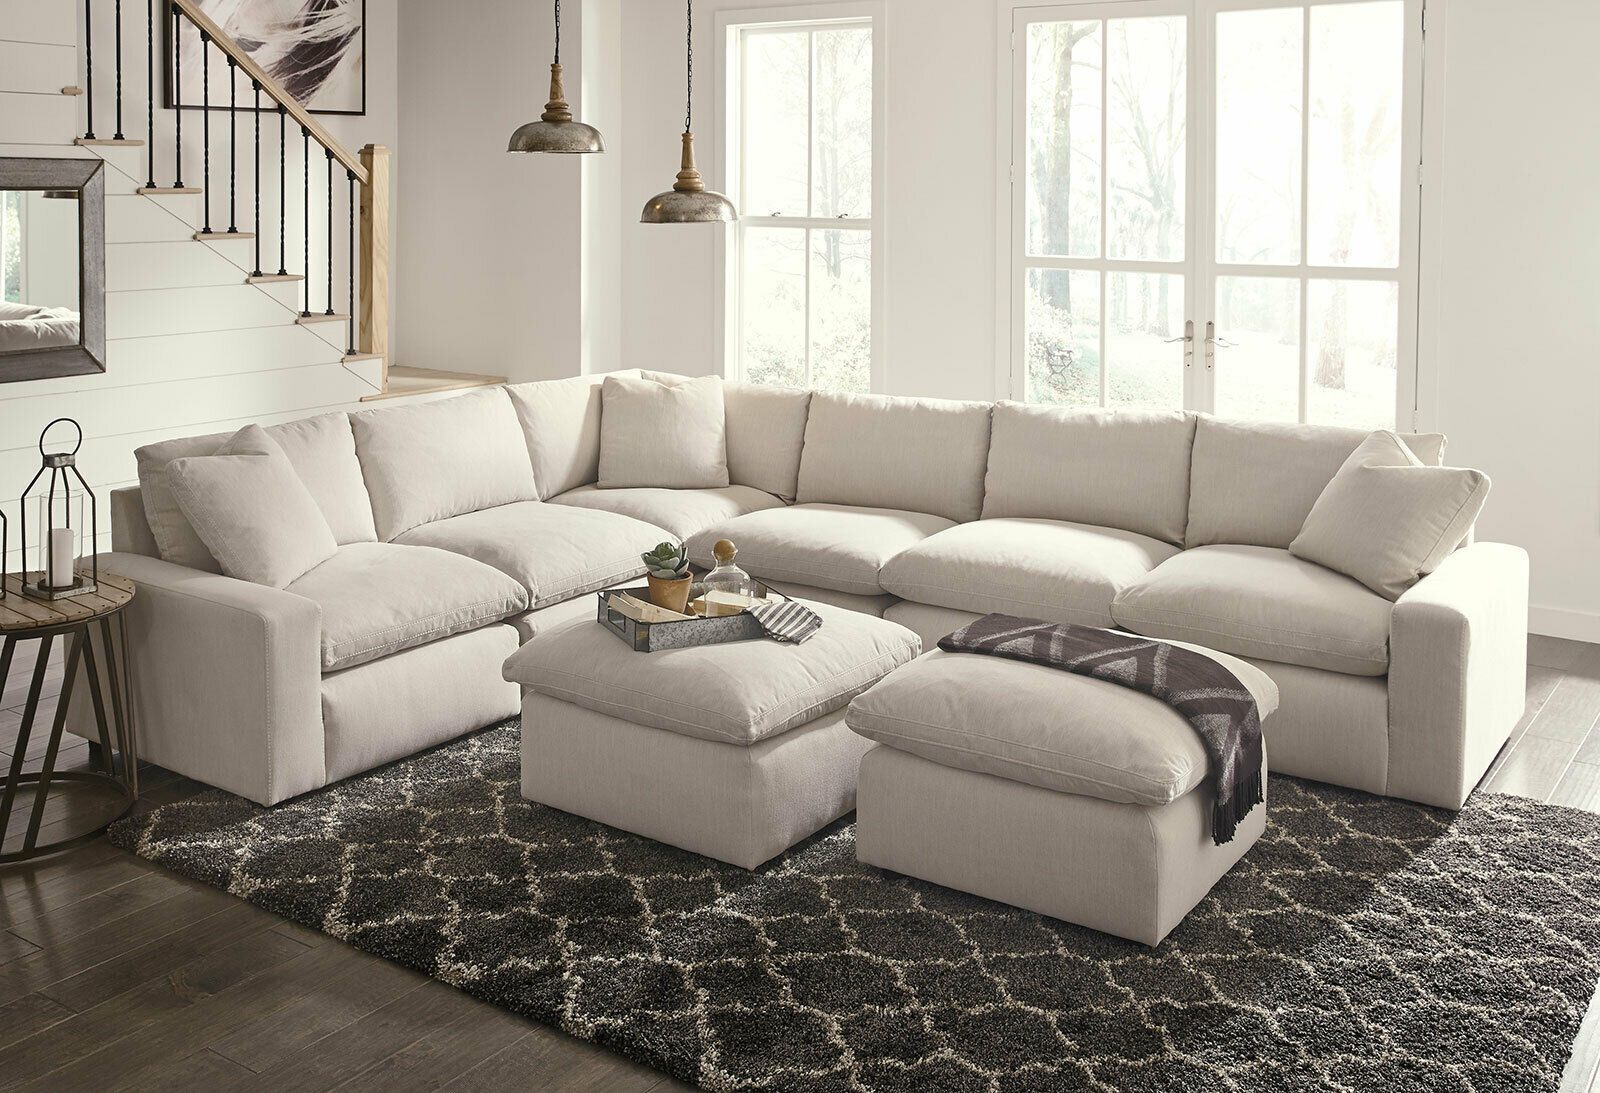 Warner 8Pc Modular Sectional Living Room Off White Fabric Regarding White Sofa Chairs (View 10 of 15)